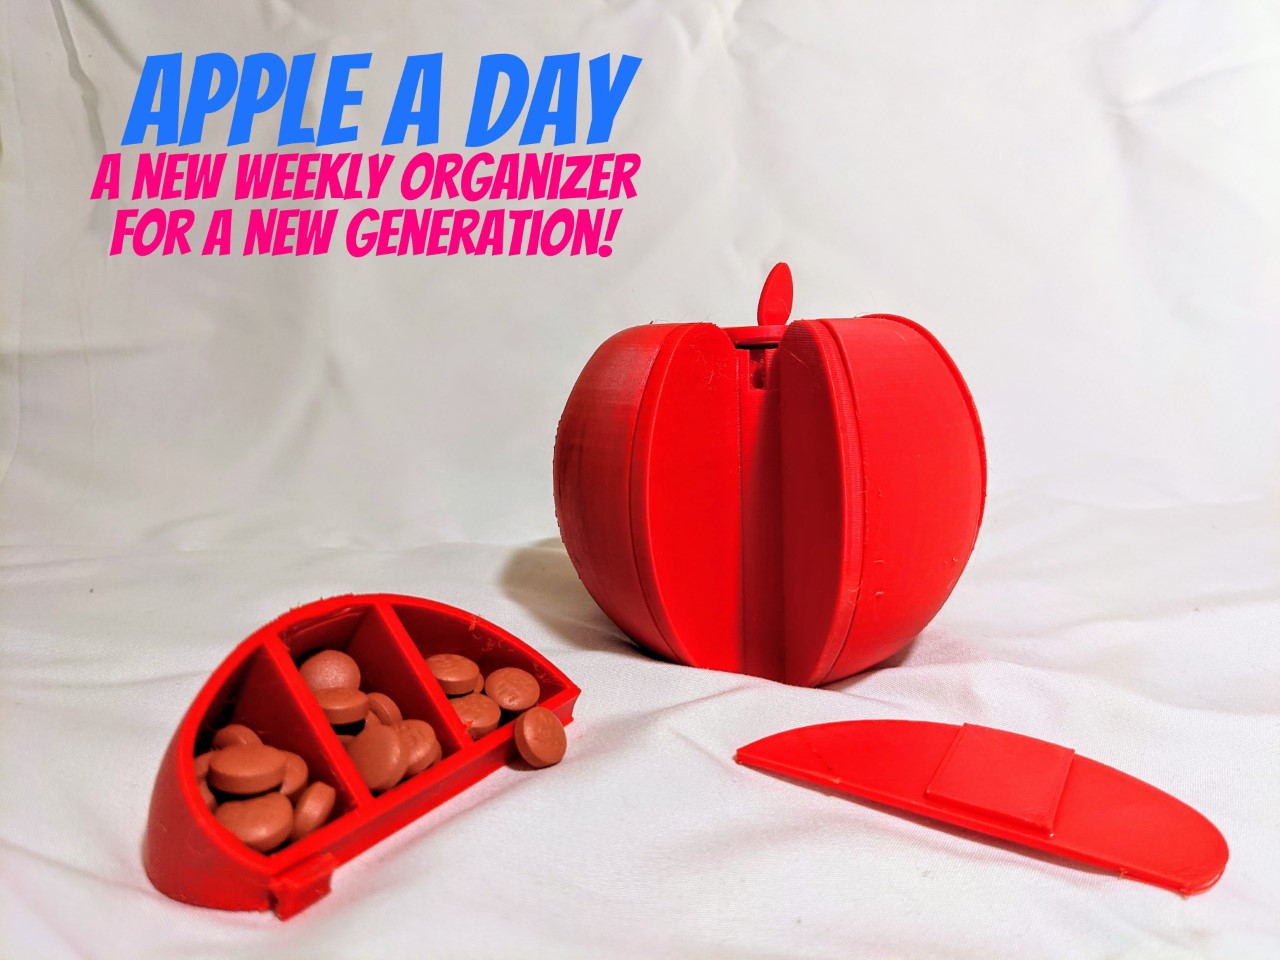 Team Apple a Day’s prototype of their product. It consists of a red apple with several sections, each of which could be used to hold daily medications